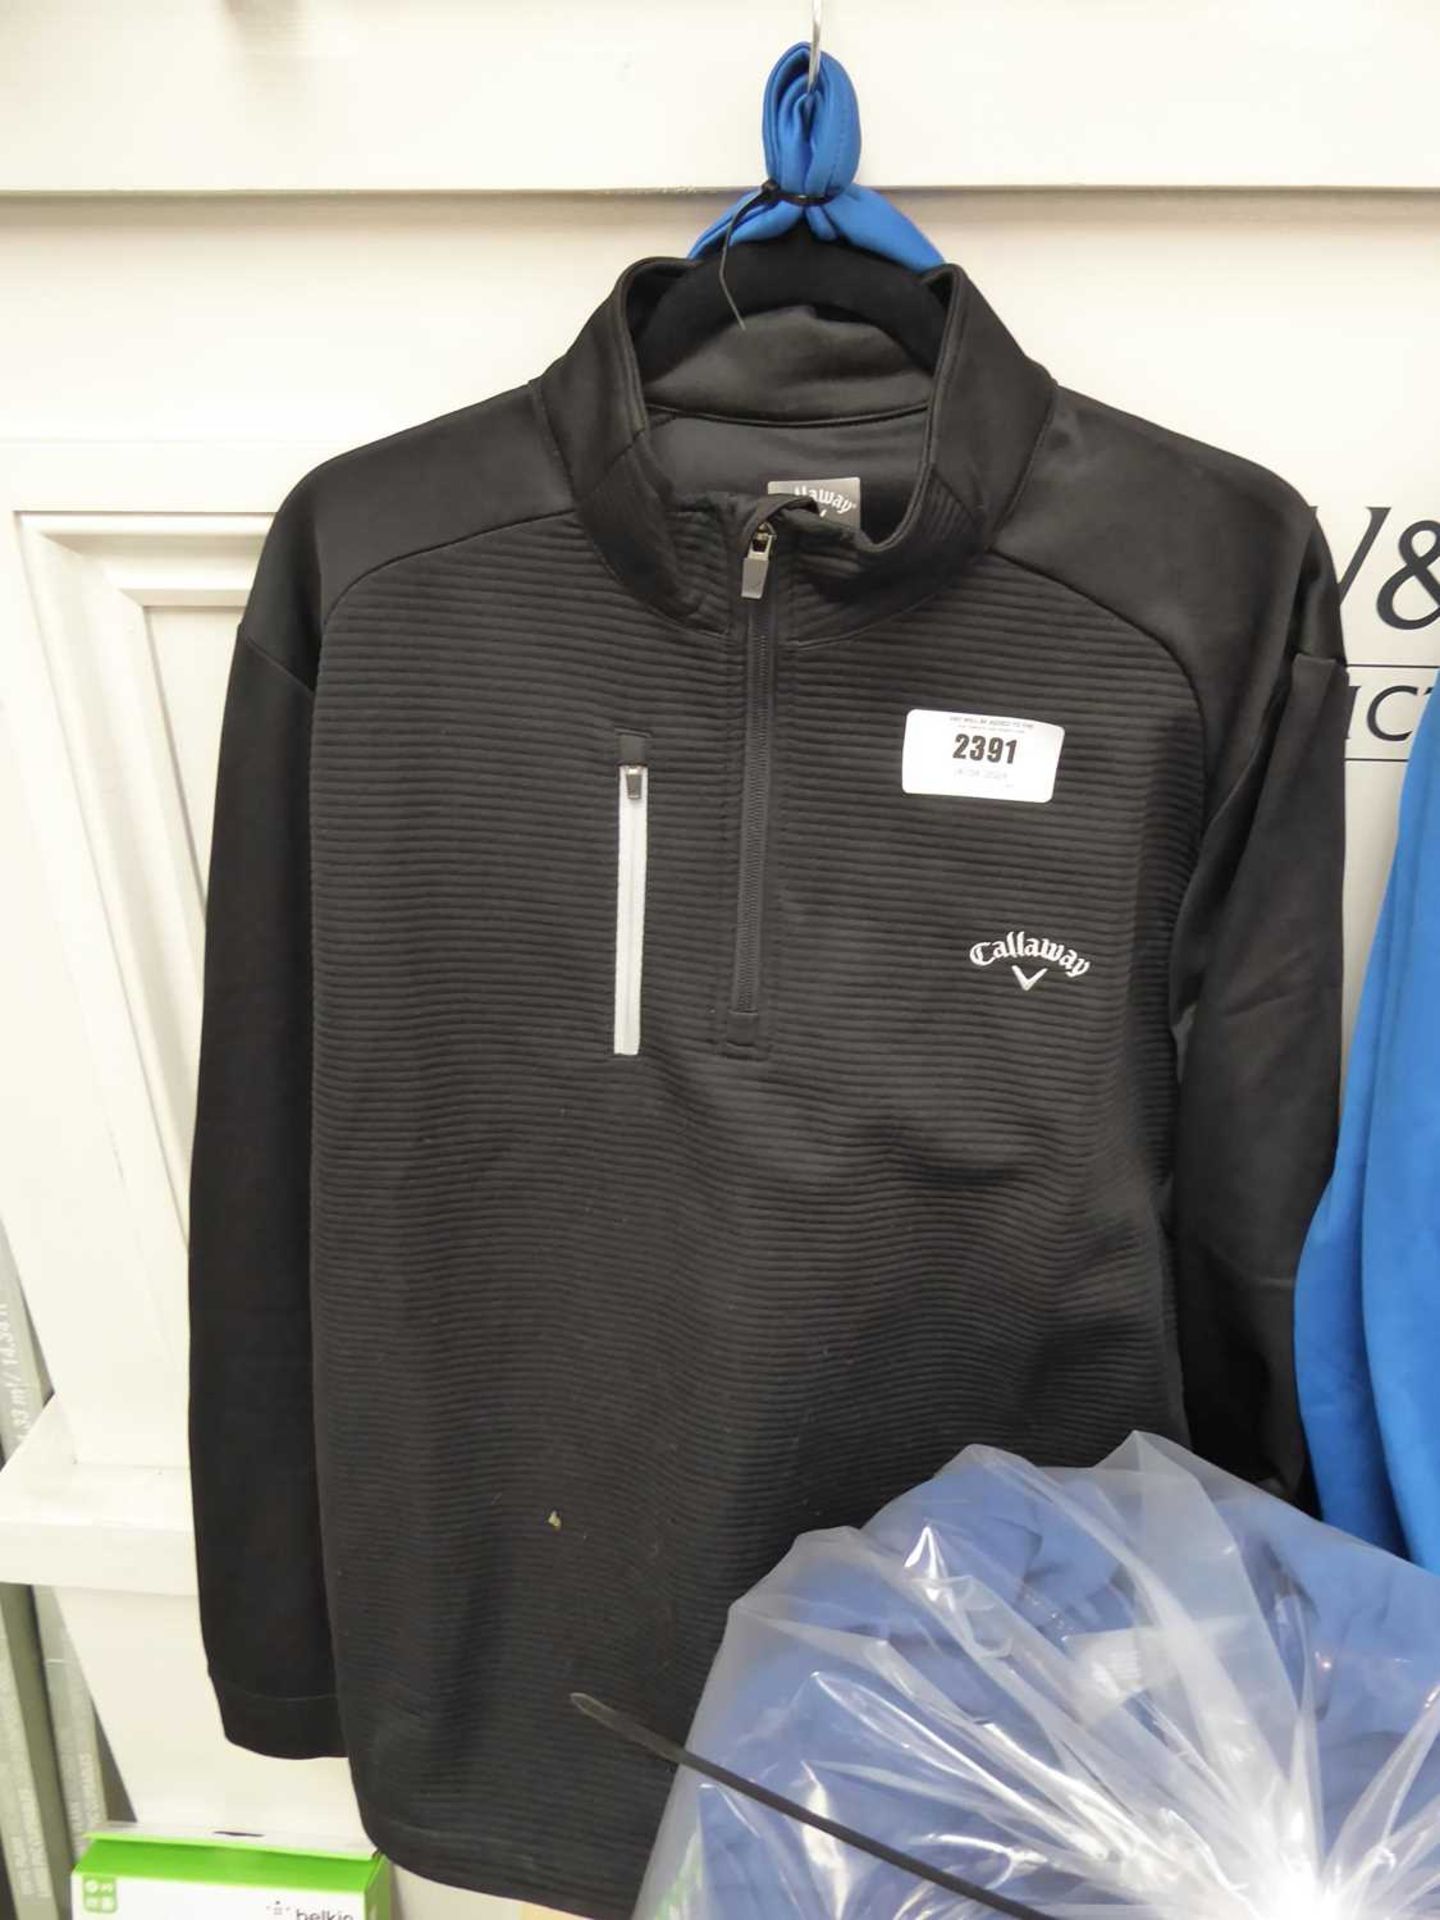 +VAT 2 Callaway quarter neck zip up long sleeve tops, 1 in black and 1 in blue (size L)